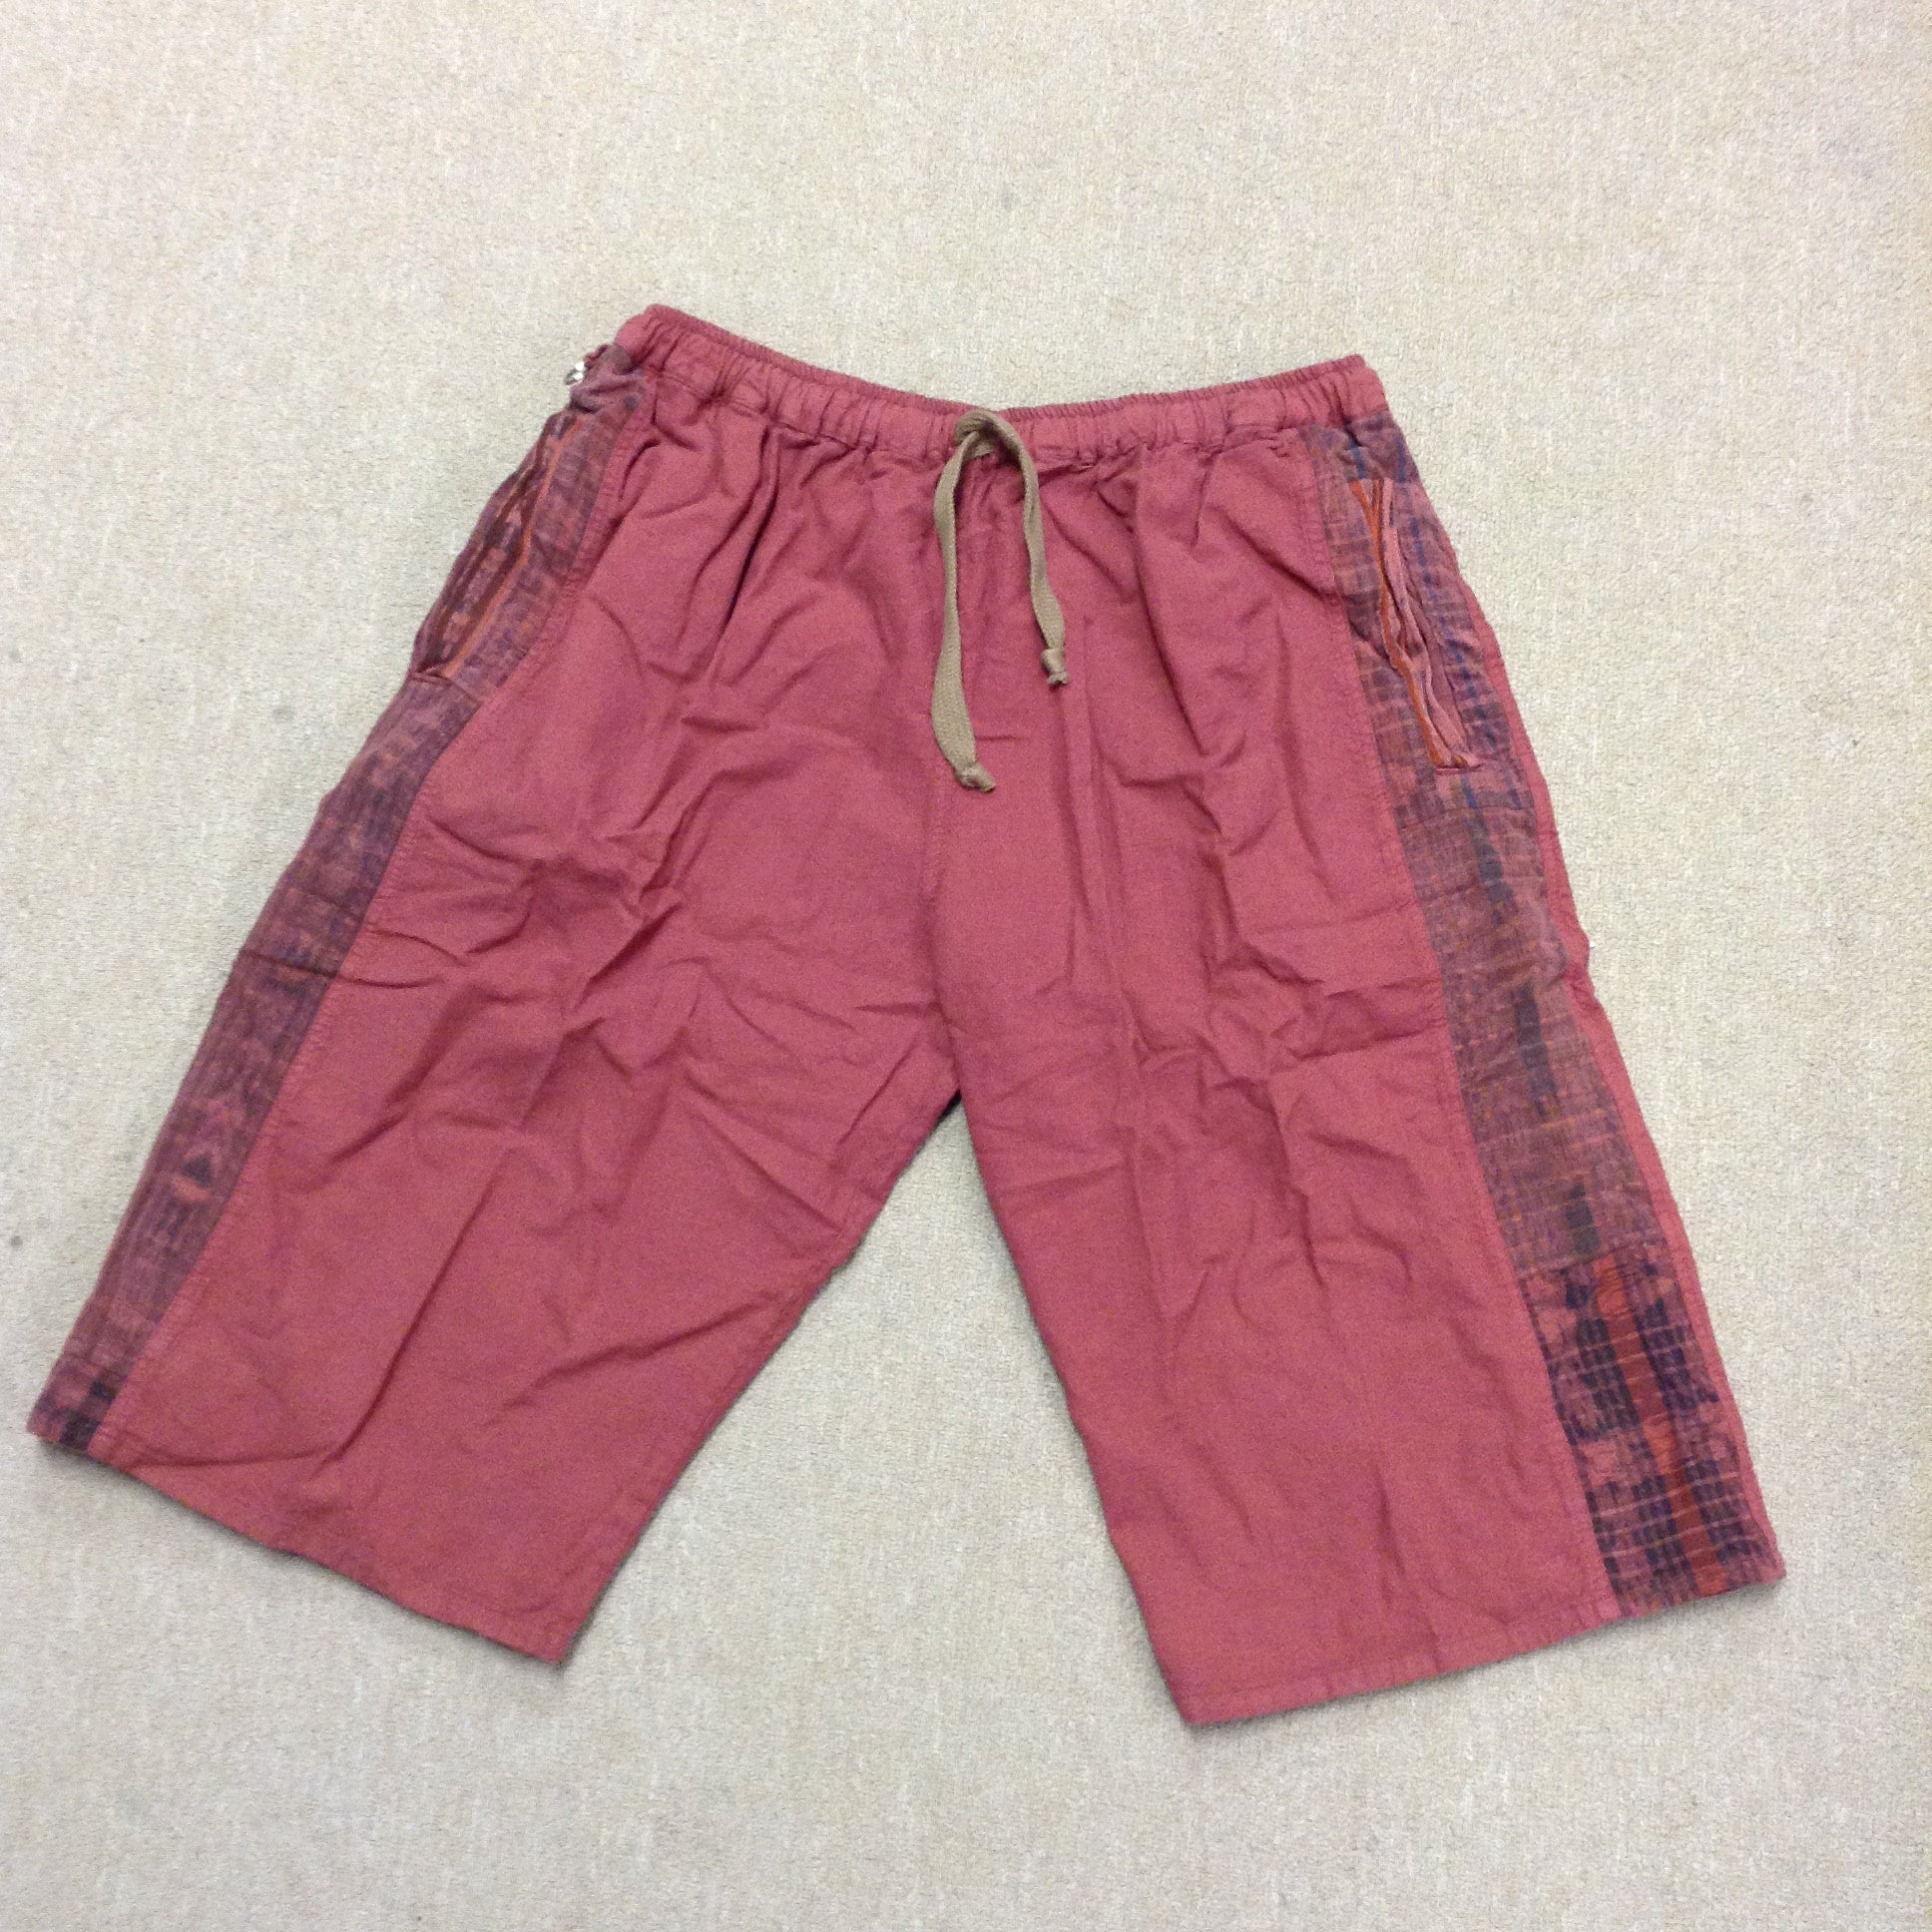 Mens Shorts with Hand Woven Accents - HalfMoonMusic